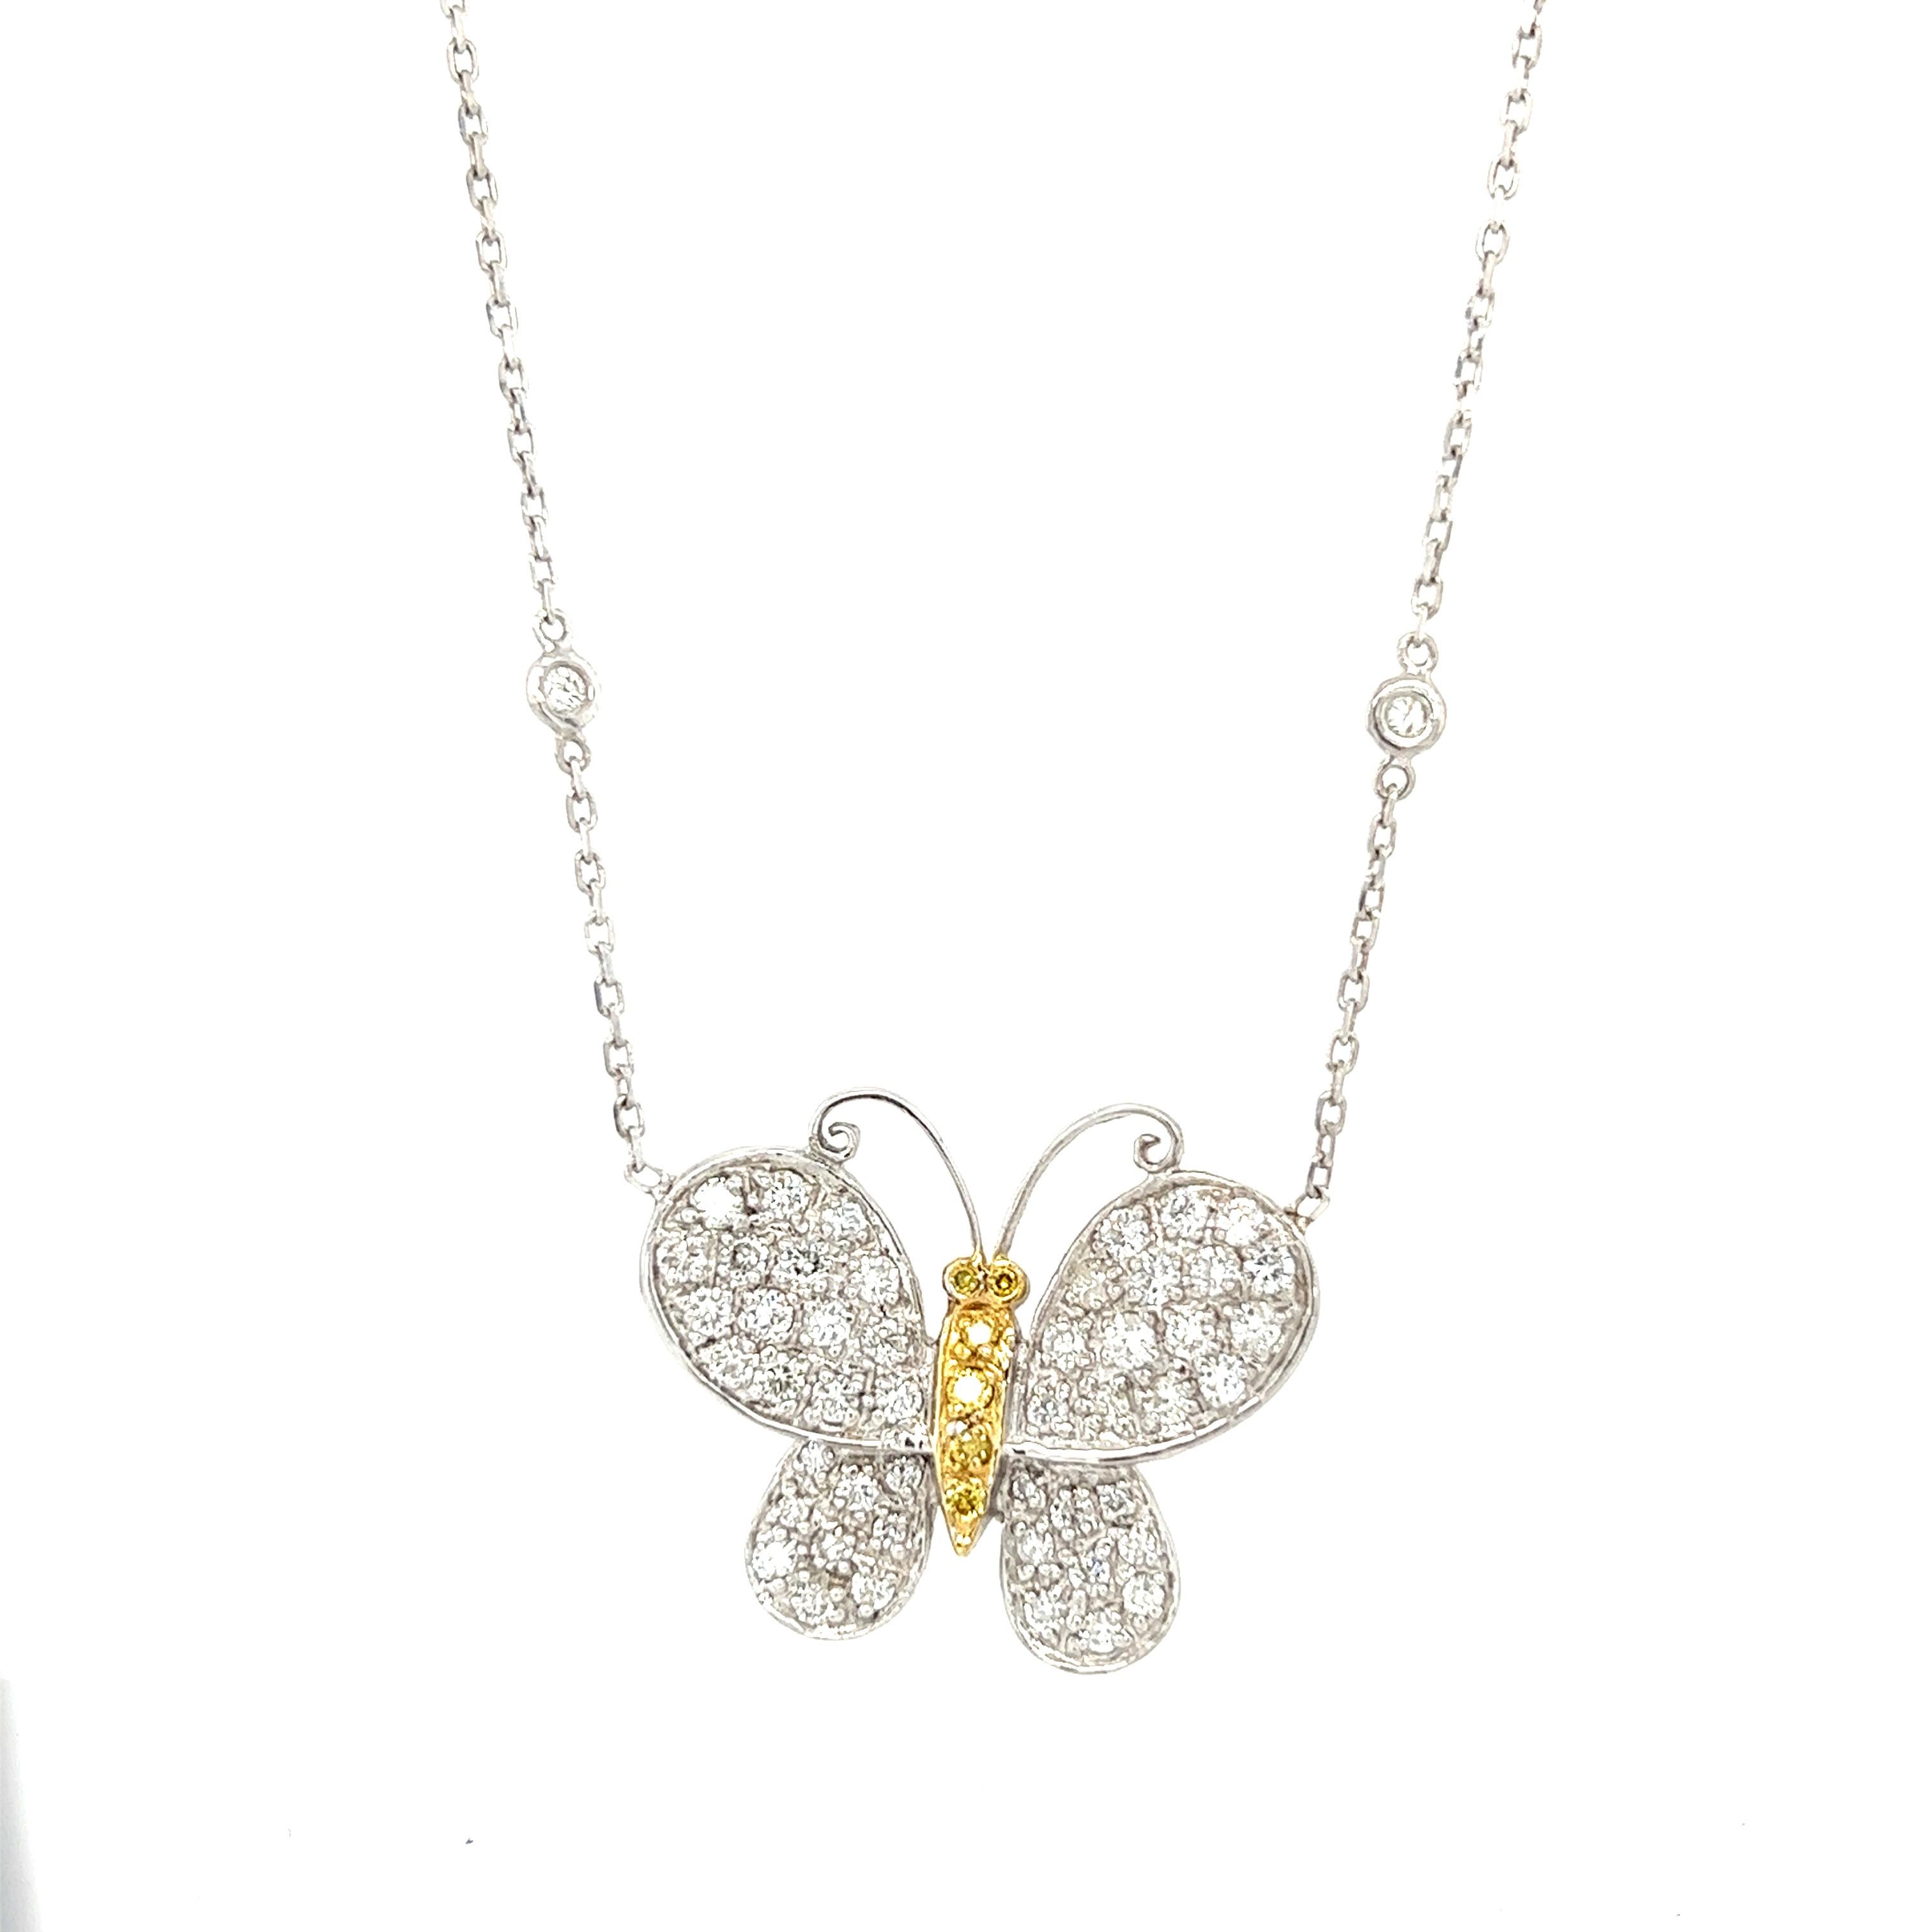 This beautiful butterfly shaped necklace has Natural Round Cut Diamonds that weigh 1.30 carats and Natural Orange Round Cut Diamonds that weigh 0.08 carats. The total carat weight of the necklace is 1.38 carats. 

The chain measures at 18 inches